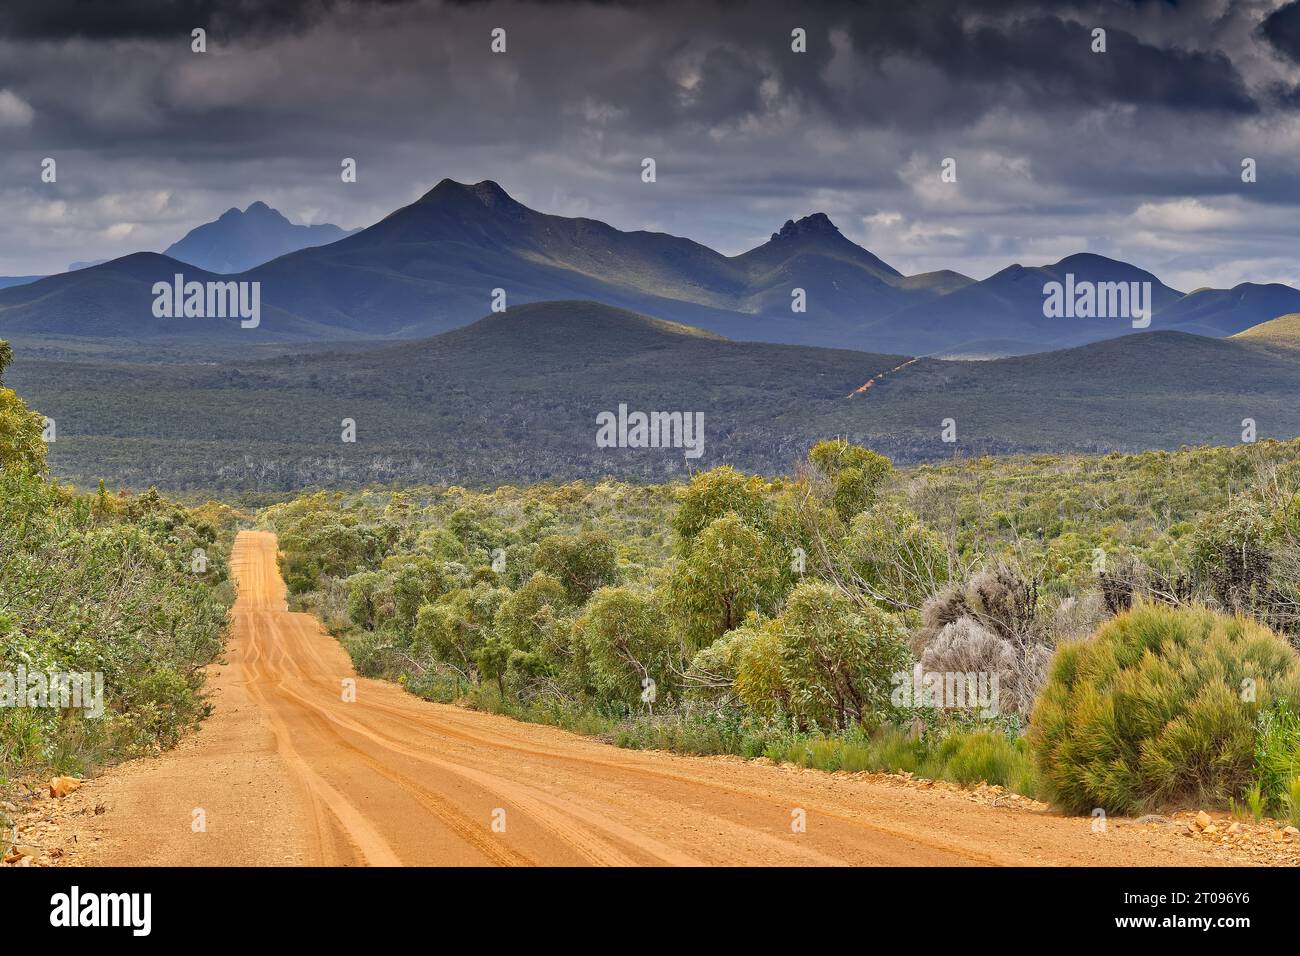 Panoramic view of Stirling Range National Park mountain peaks and outback dirt road in Western Australia. Stock Photo